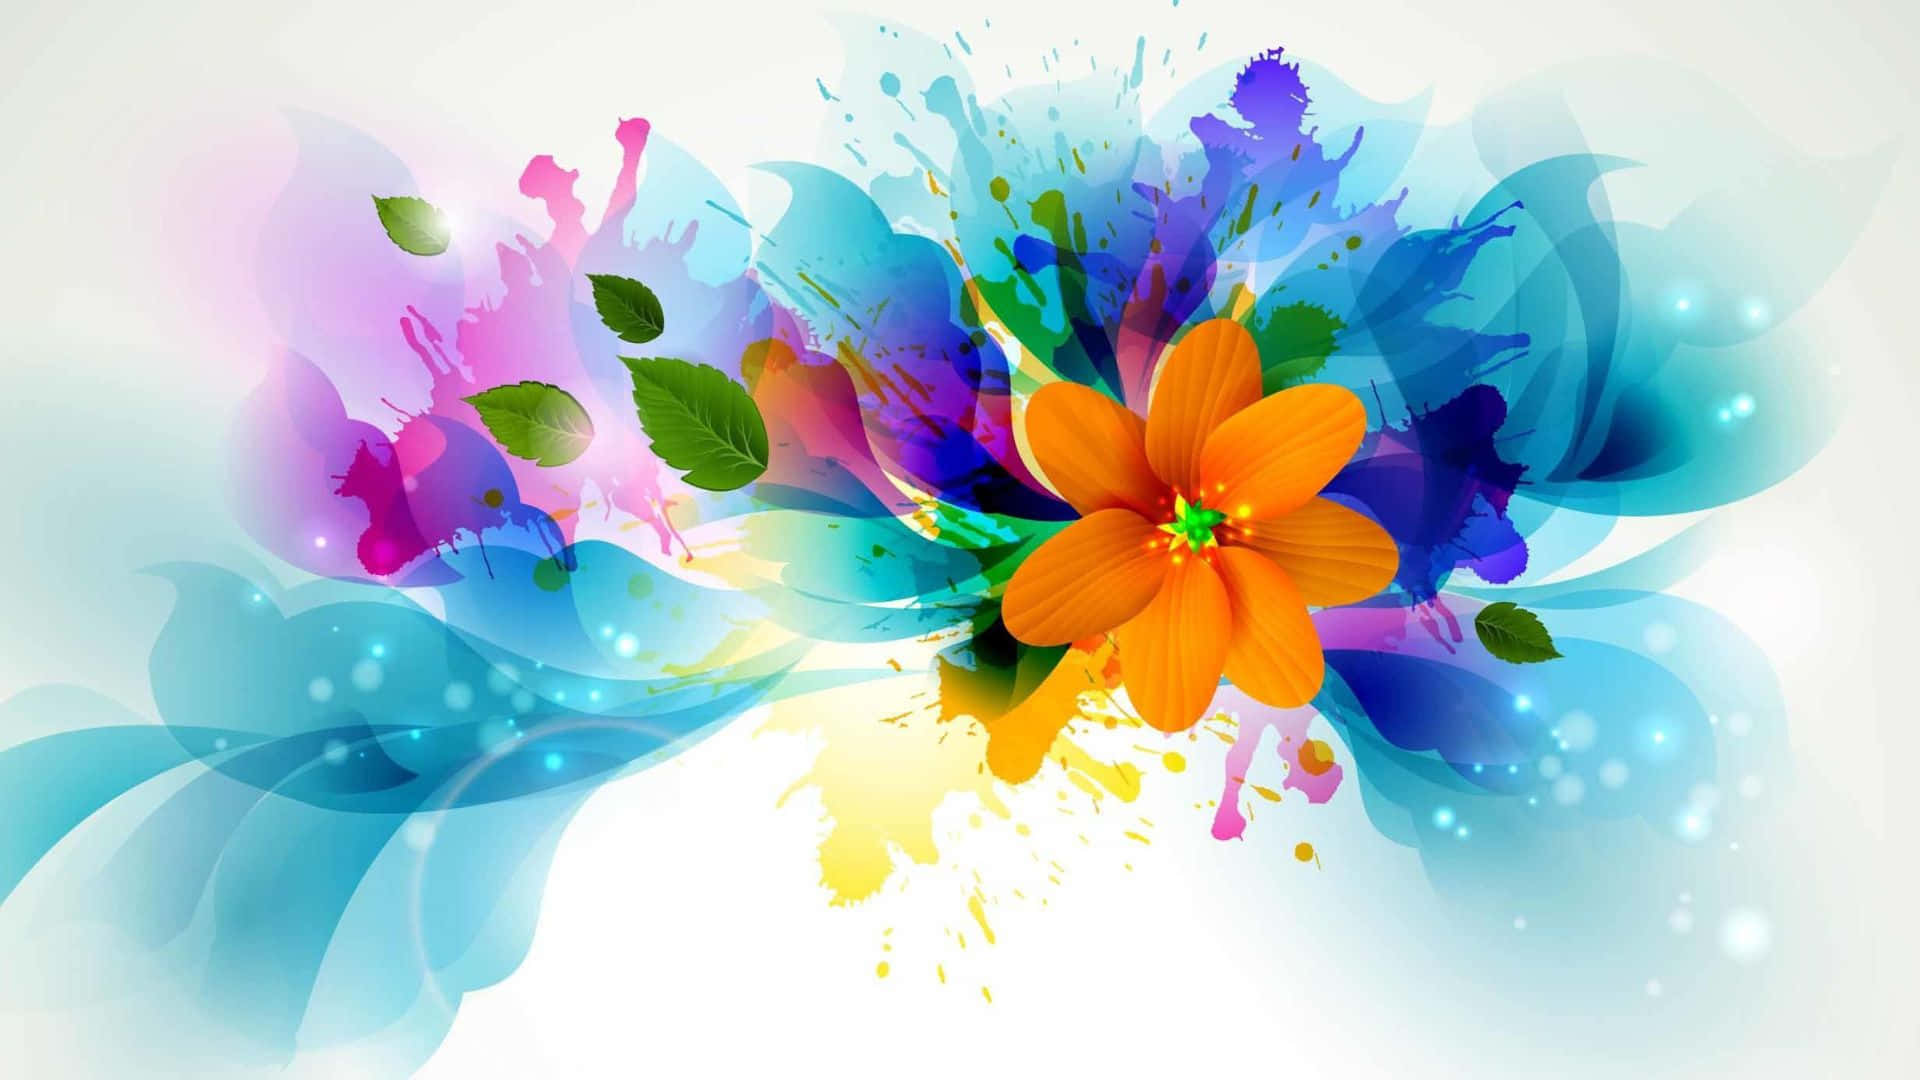 Colorful Flower With Leaves And Splatters